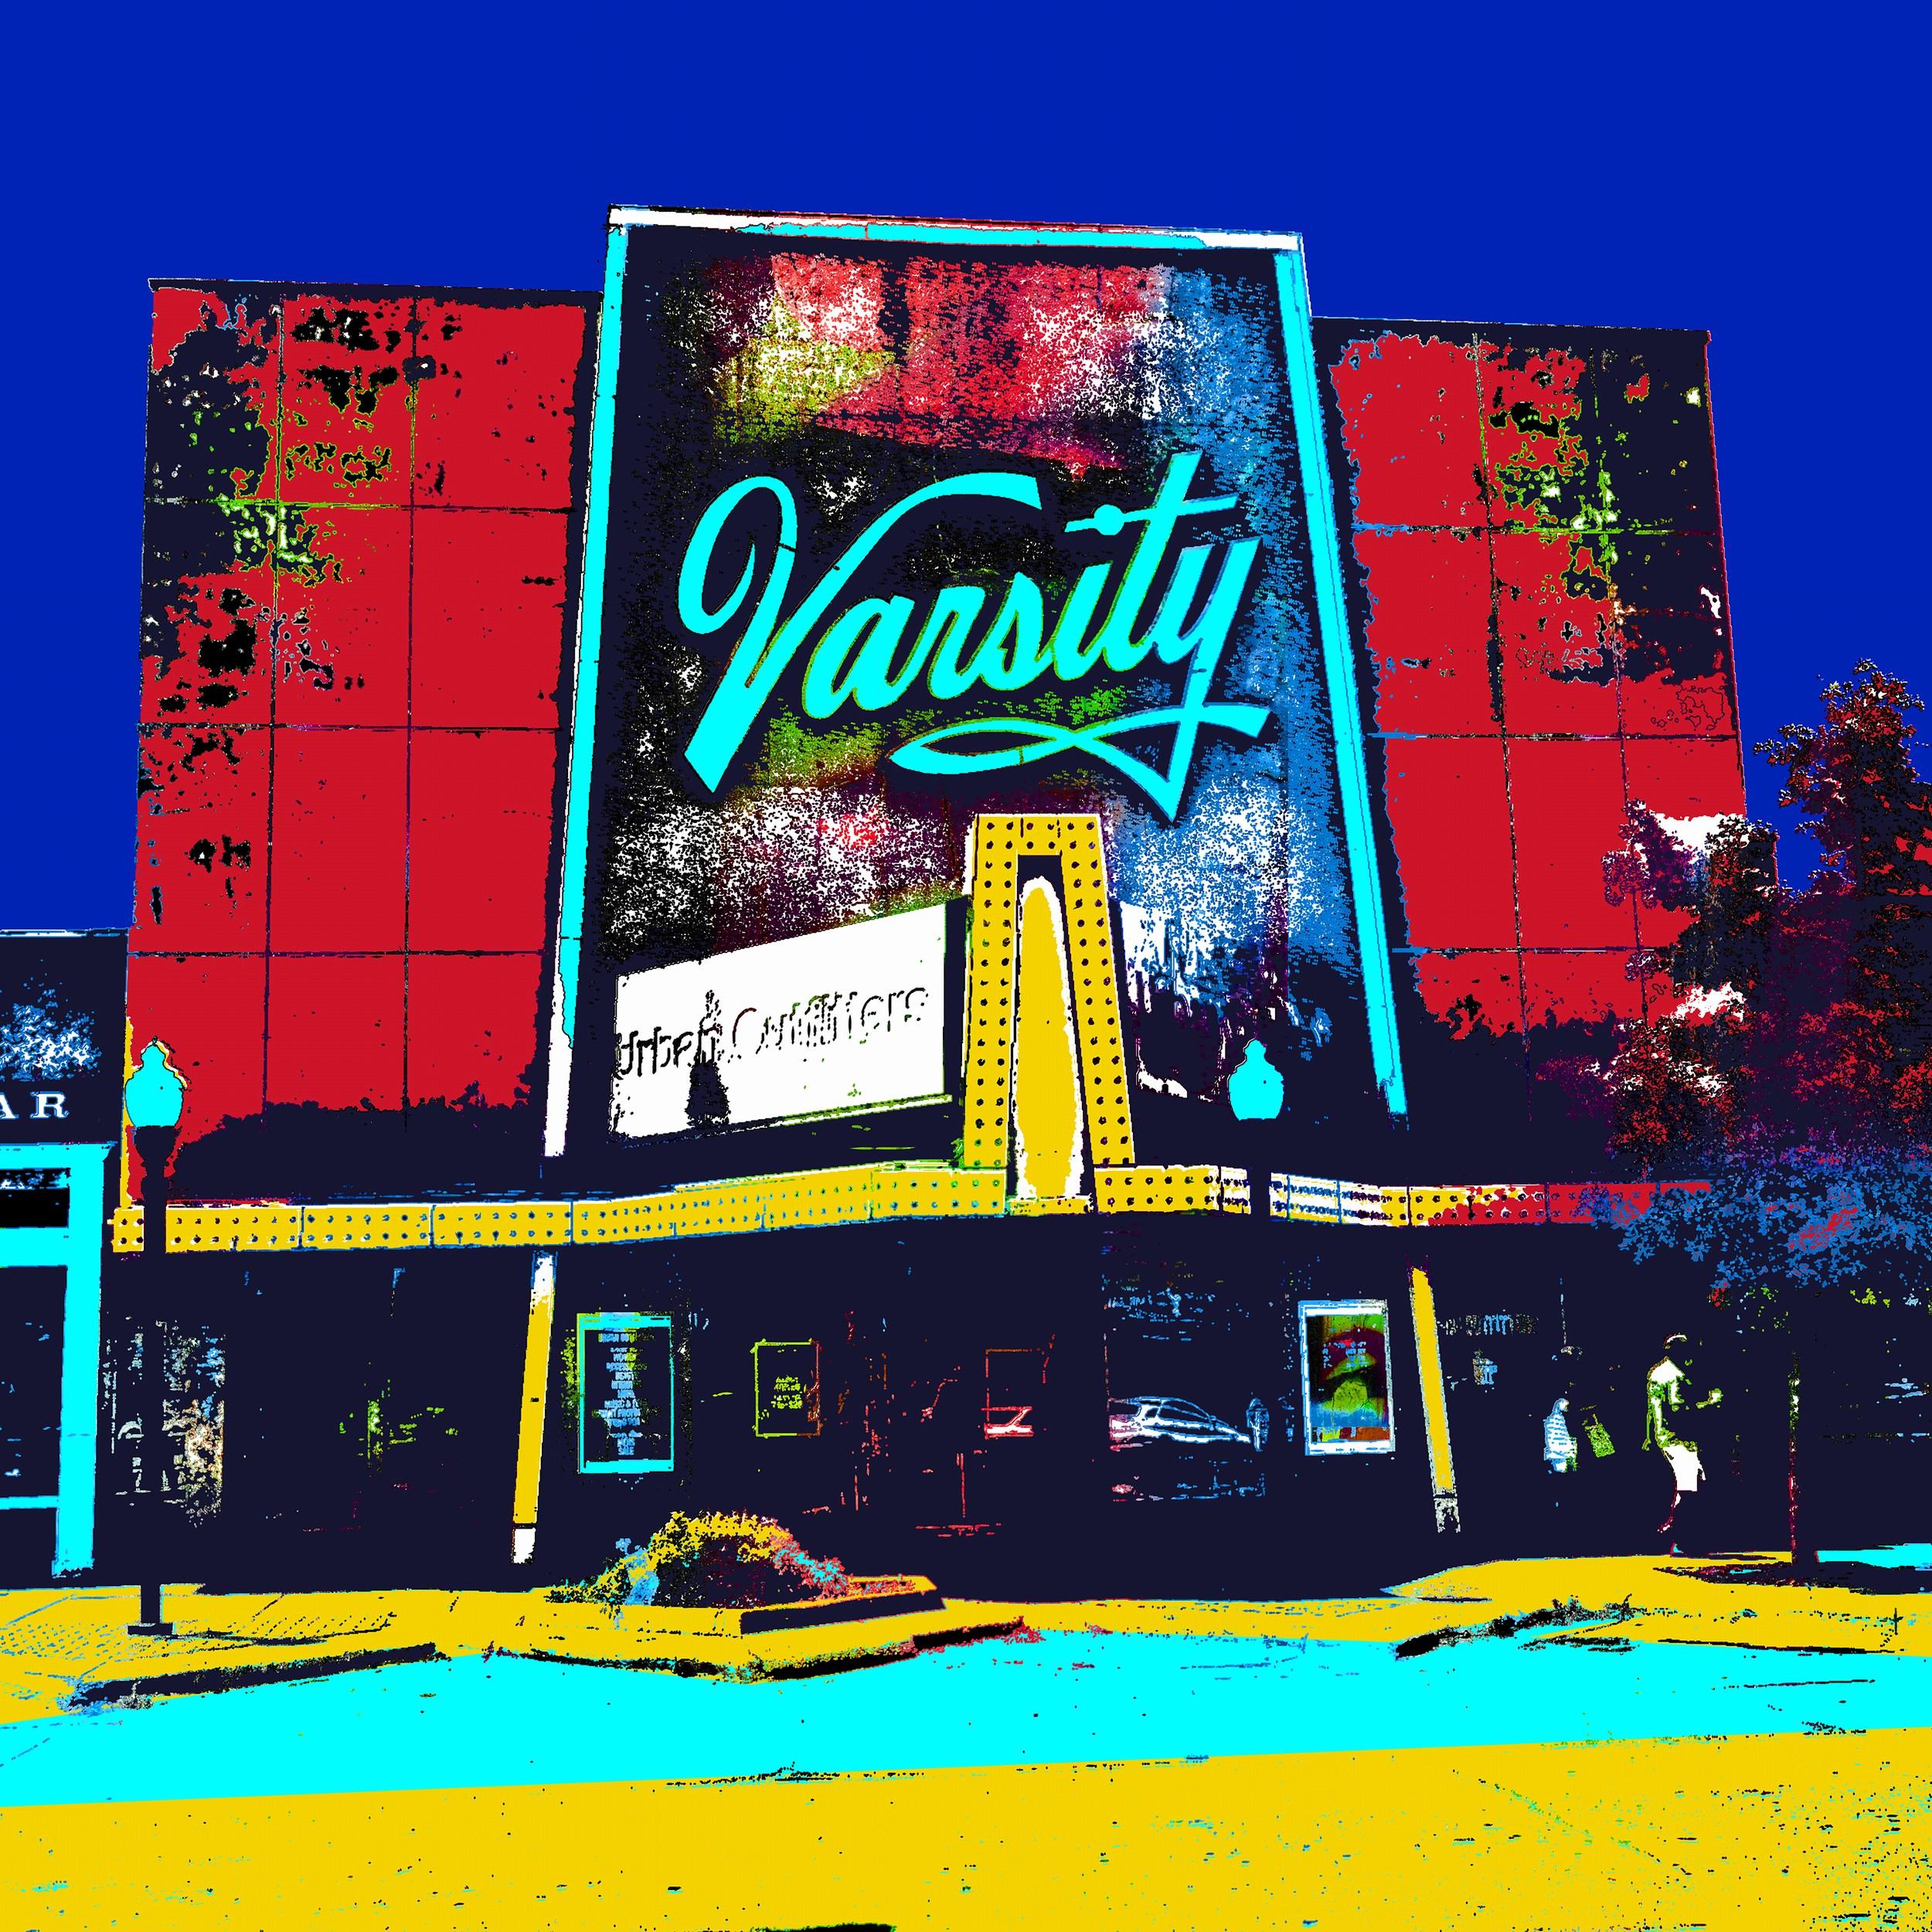 Katrina Revenaugh
“The Varsity Theater”
Dye Sublimation Print on Aluminum, 2024
Size Options: 12 x 12 inches, 20 x 20 inches or 30 x 30 inches
Edition: 75 + AP
Signed and titled on label provided separately
COA included

Tags: #ArtisticExpression